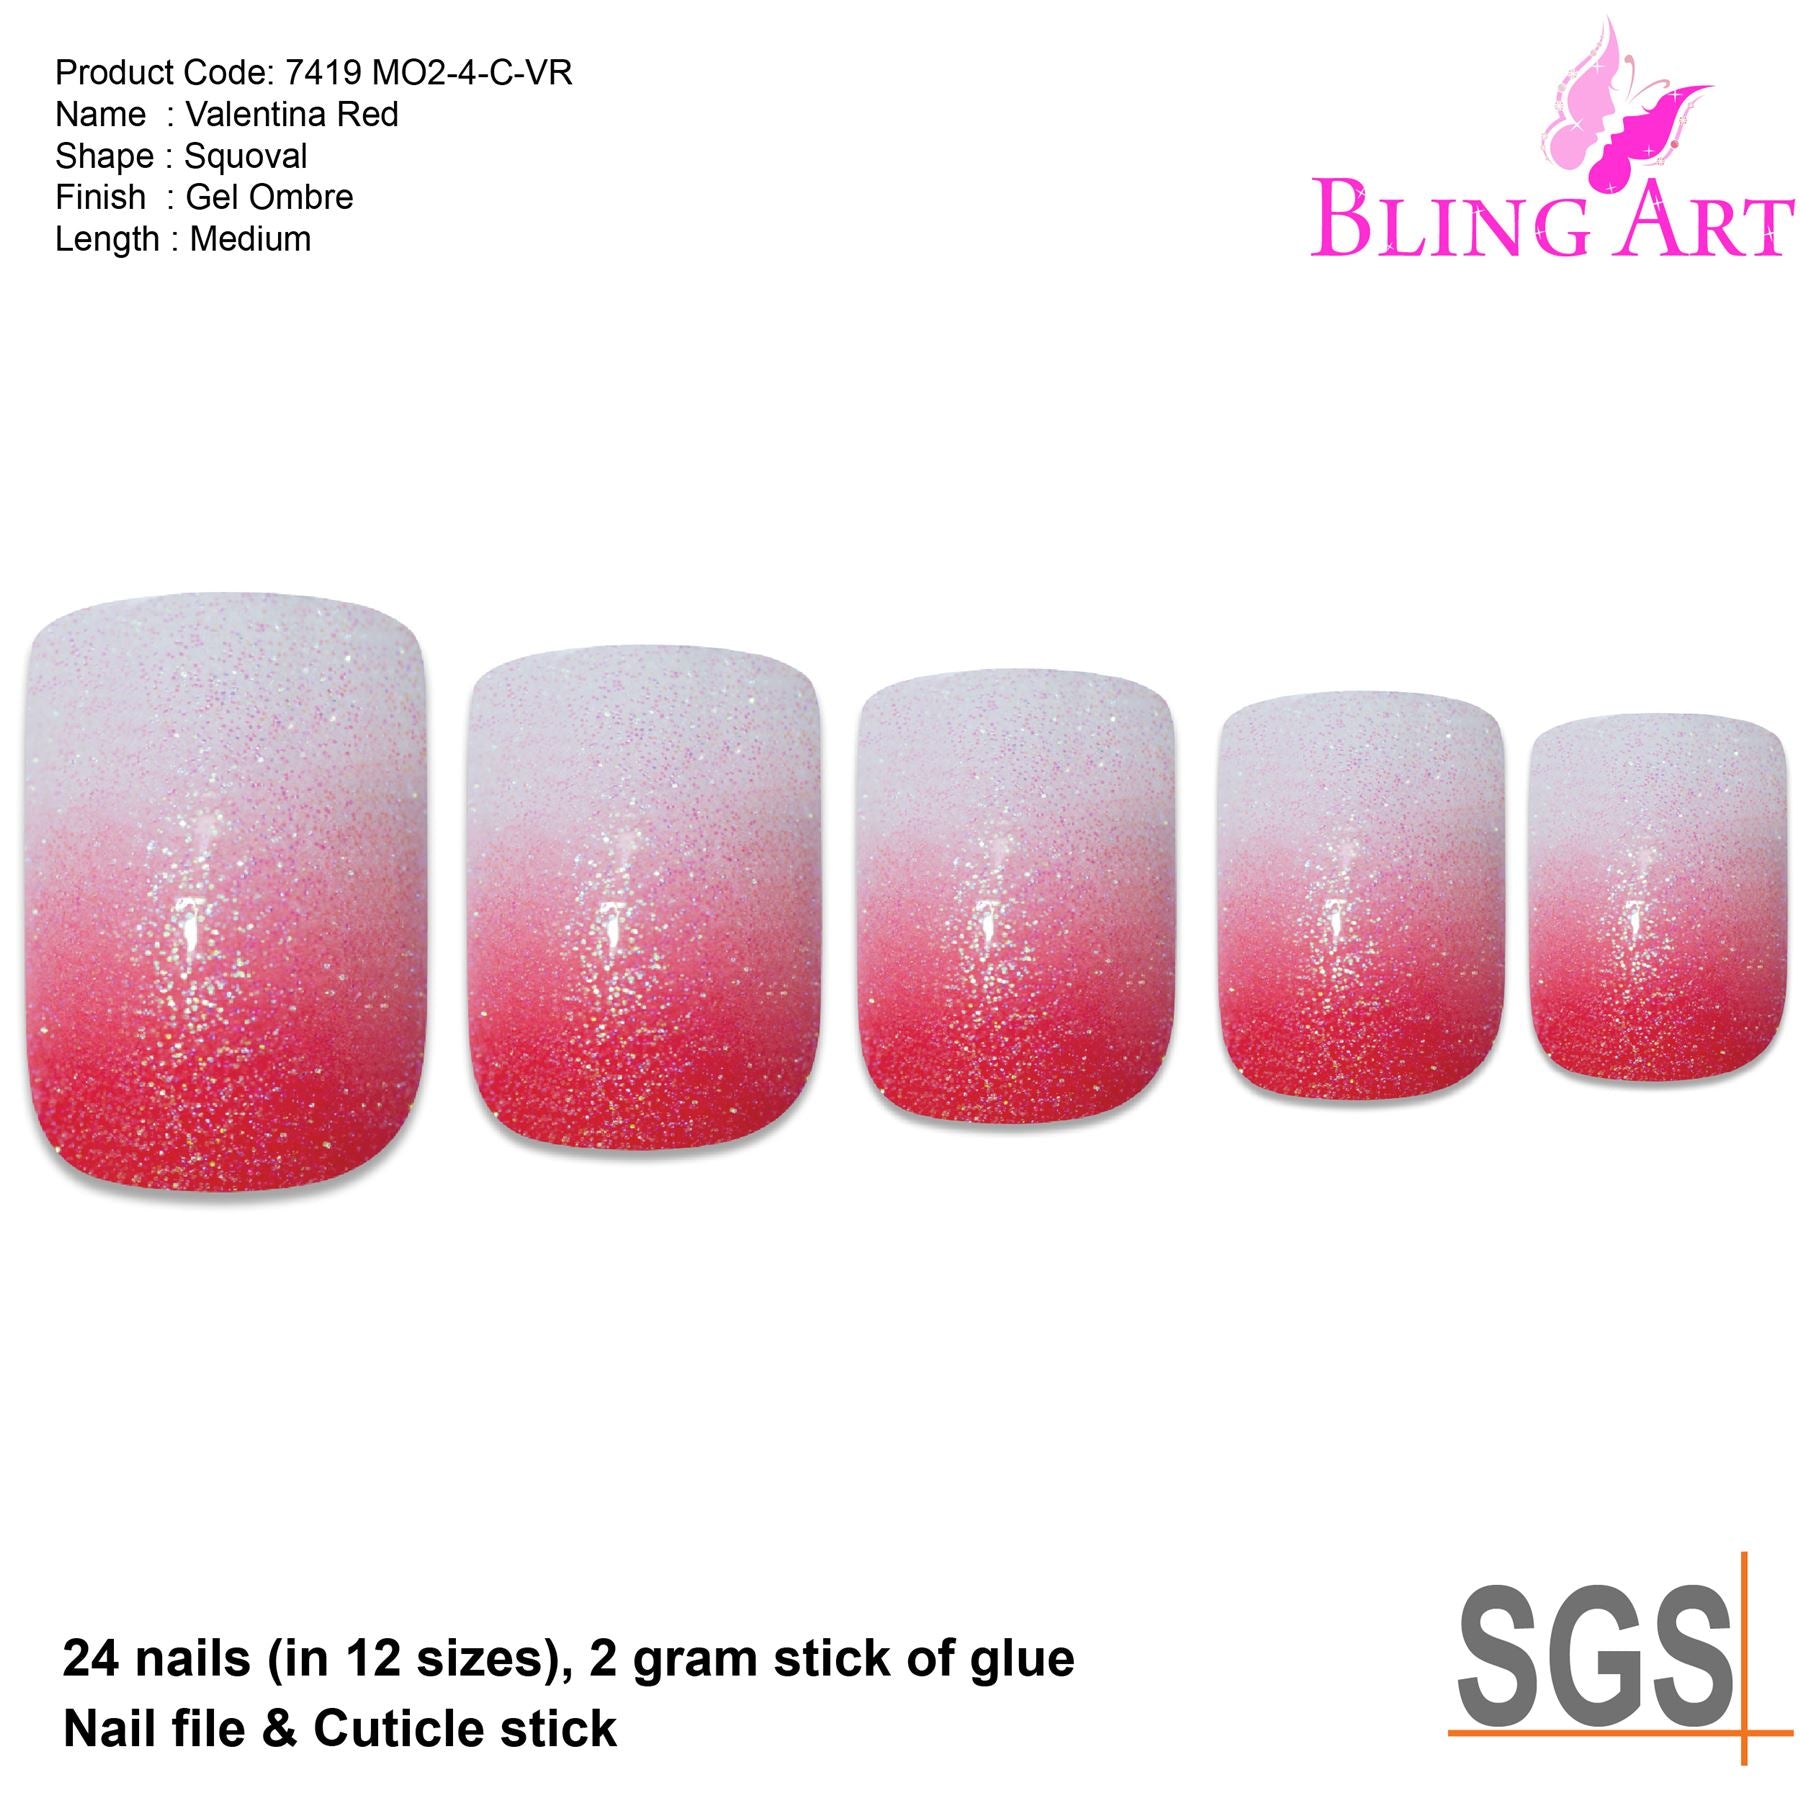 False Nails by Bling Art Red Gel Ombre French Squoval 24 Fake Medium Tips